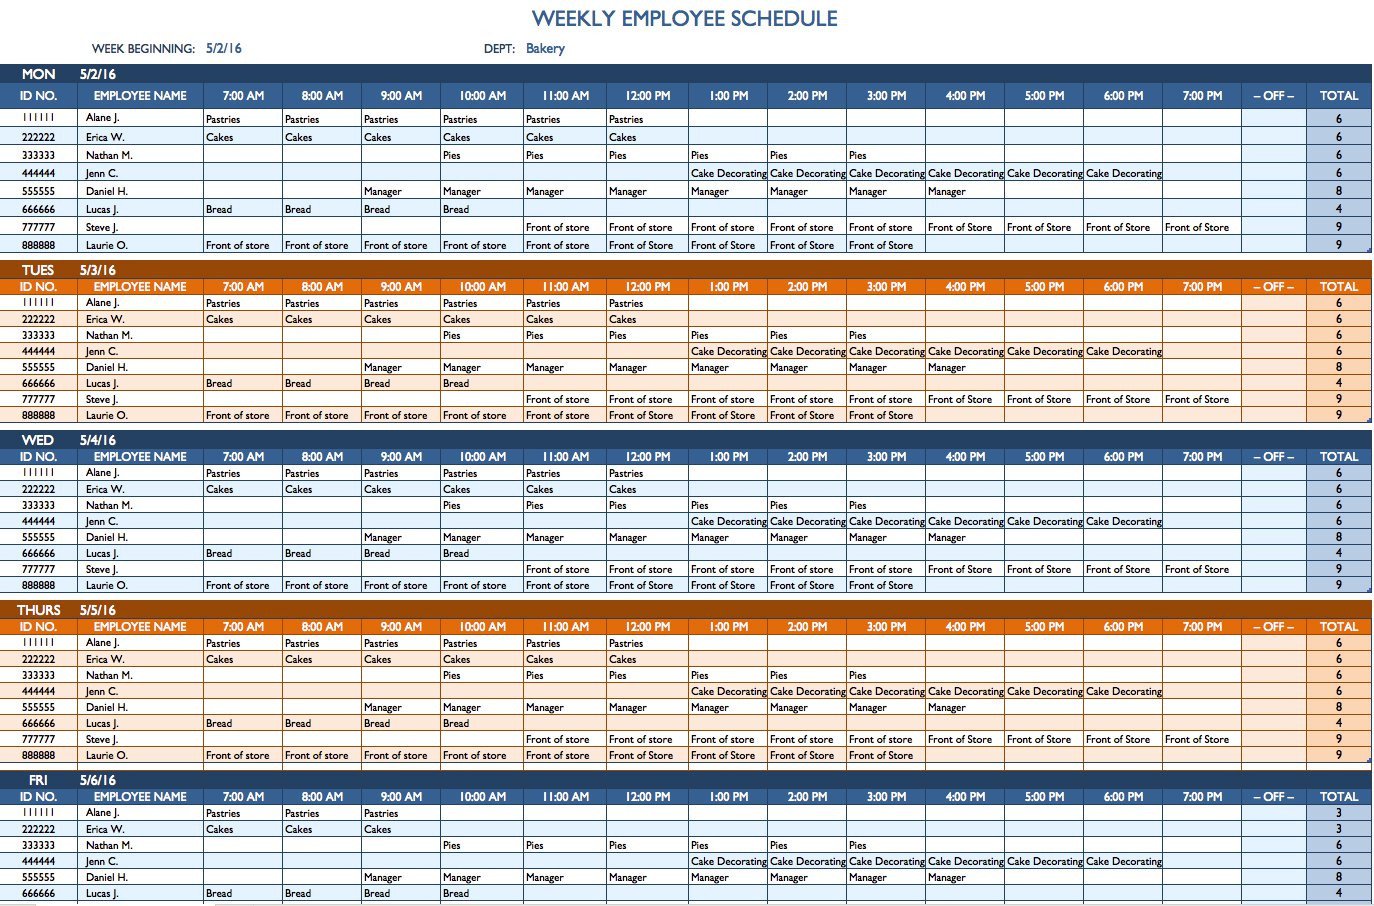 Monthly Employee Schedule Template Excel Free Weekly Schedule Templates for Excel Smartsheet